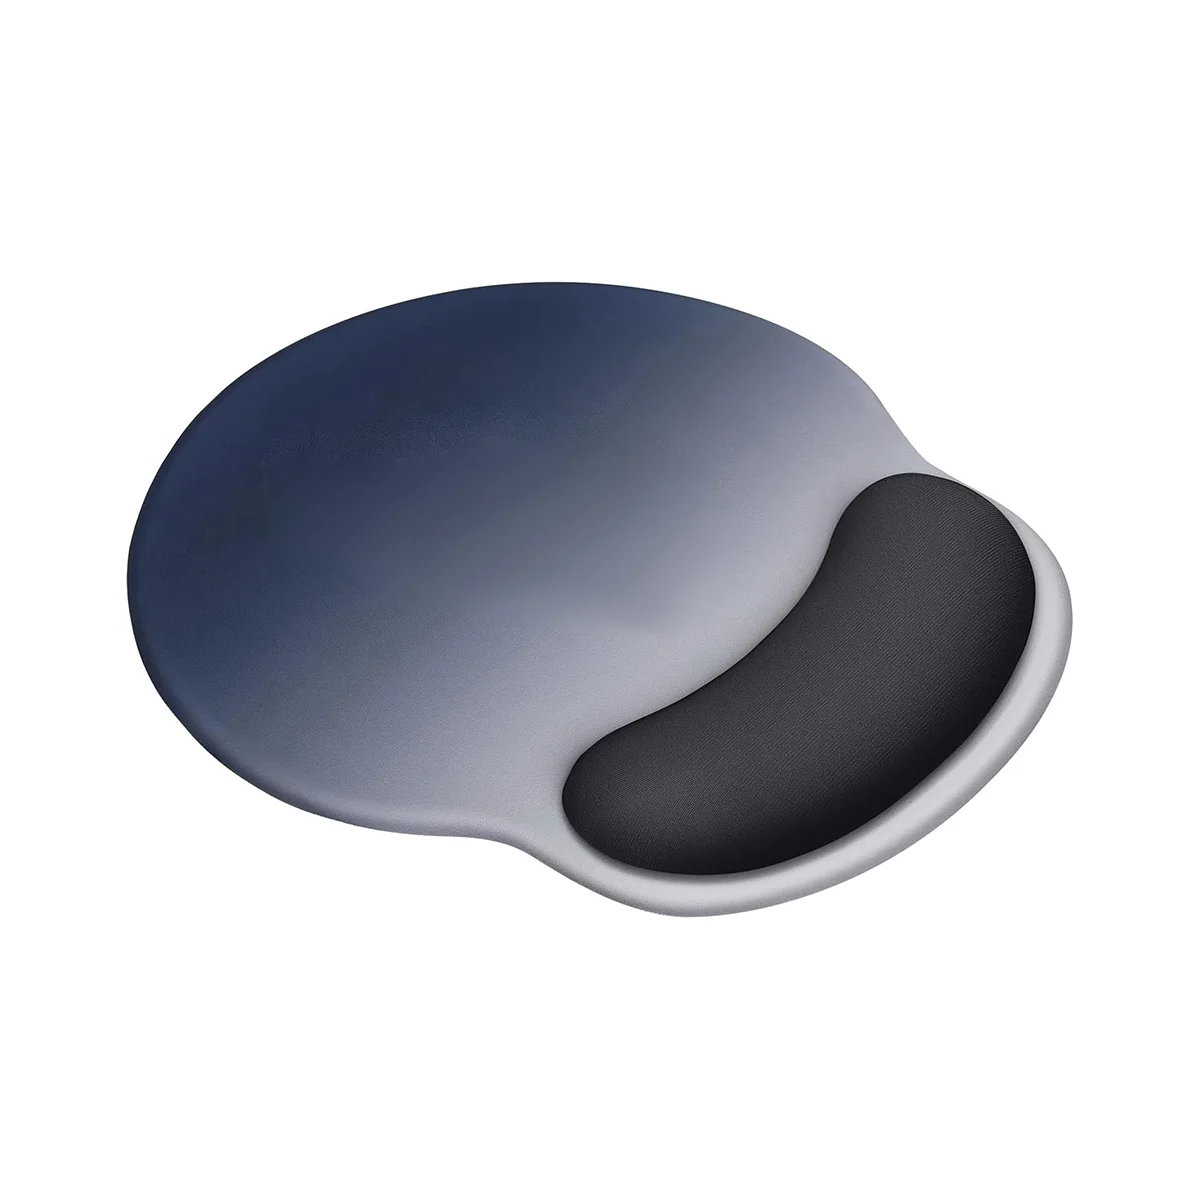 

Ergonomic Mousepad with Wrist Rest Support with Non-Slip Base for Easy Typing Pain Relief, Mouse Pad for Typist Office